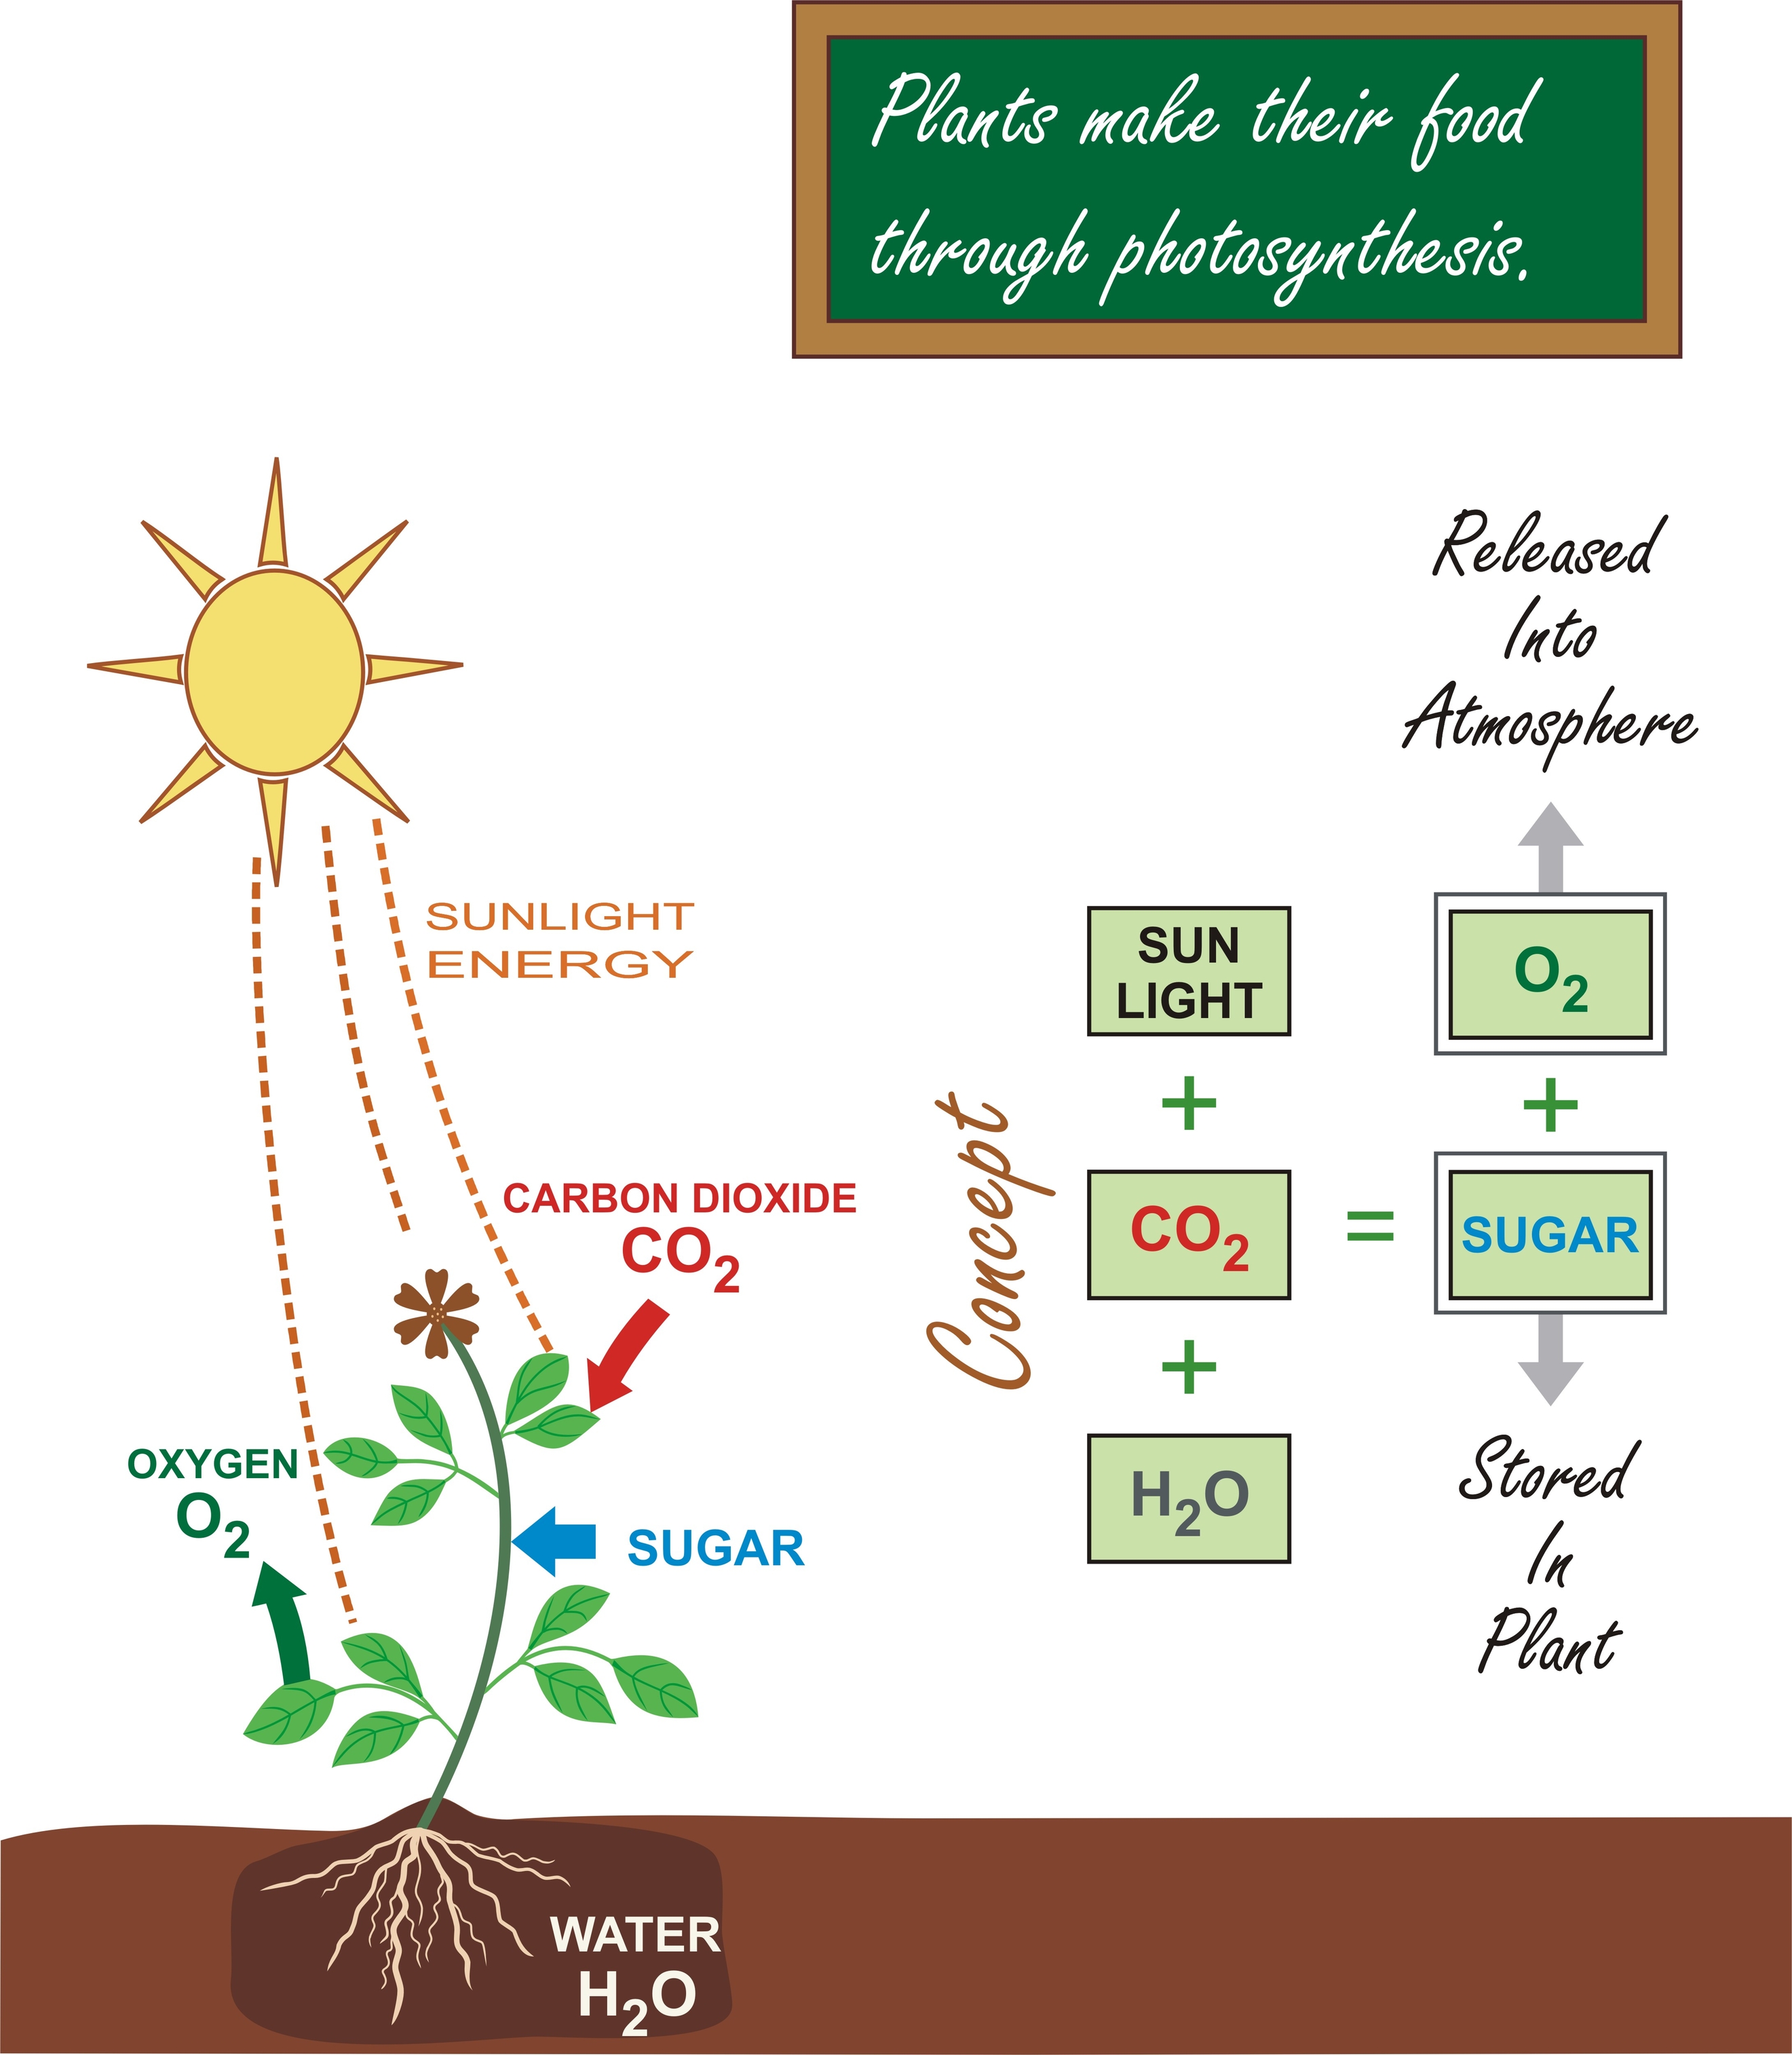 what is the summary reaction of photosynthesis